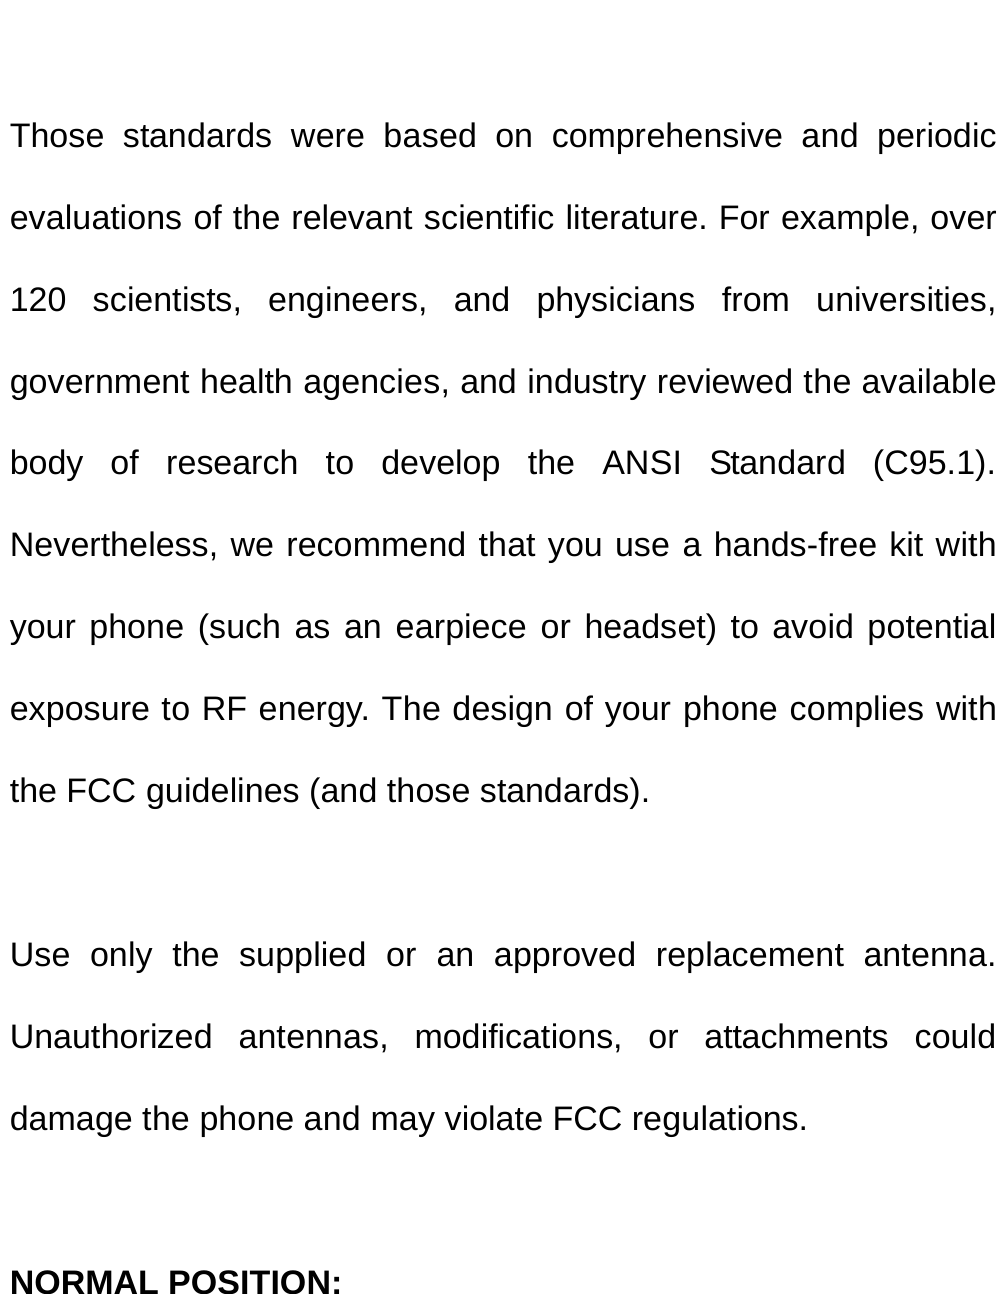   Those standards were based on comprehensive and periodic evaluations of the relevant scientific literature. For example, over 120 scientists, engineers, and physicians from universities, government health agencies, and industry reviewed the available body of research to develop the ANSI Standard (C95.1). Nevertheless, we recommend that you use a hands-free kit with your phone (such as an earpiece or headset) to avoid potential exposure to RF energy. The design of your phone complies with the FCC guidelines (and those standards).  Use only the supplied or an approved replacement antenna. Unauthorized antennas, modifications, or attachments could damage the phone and may violate FCC regulations.    NORMAL POSITION:   